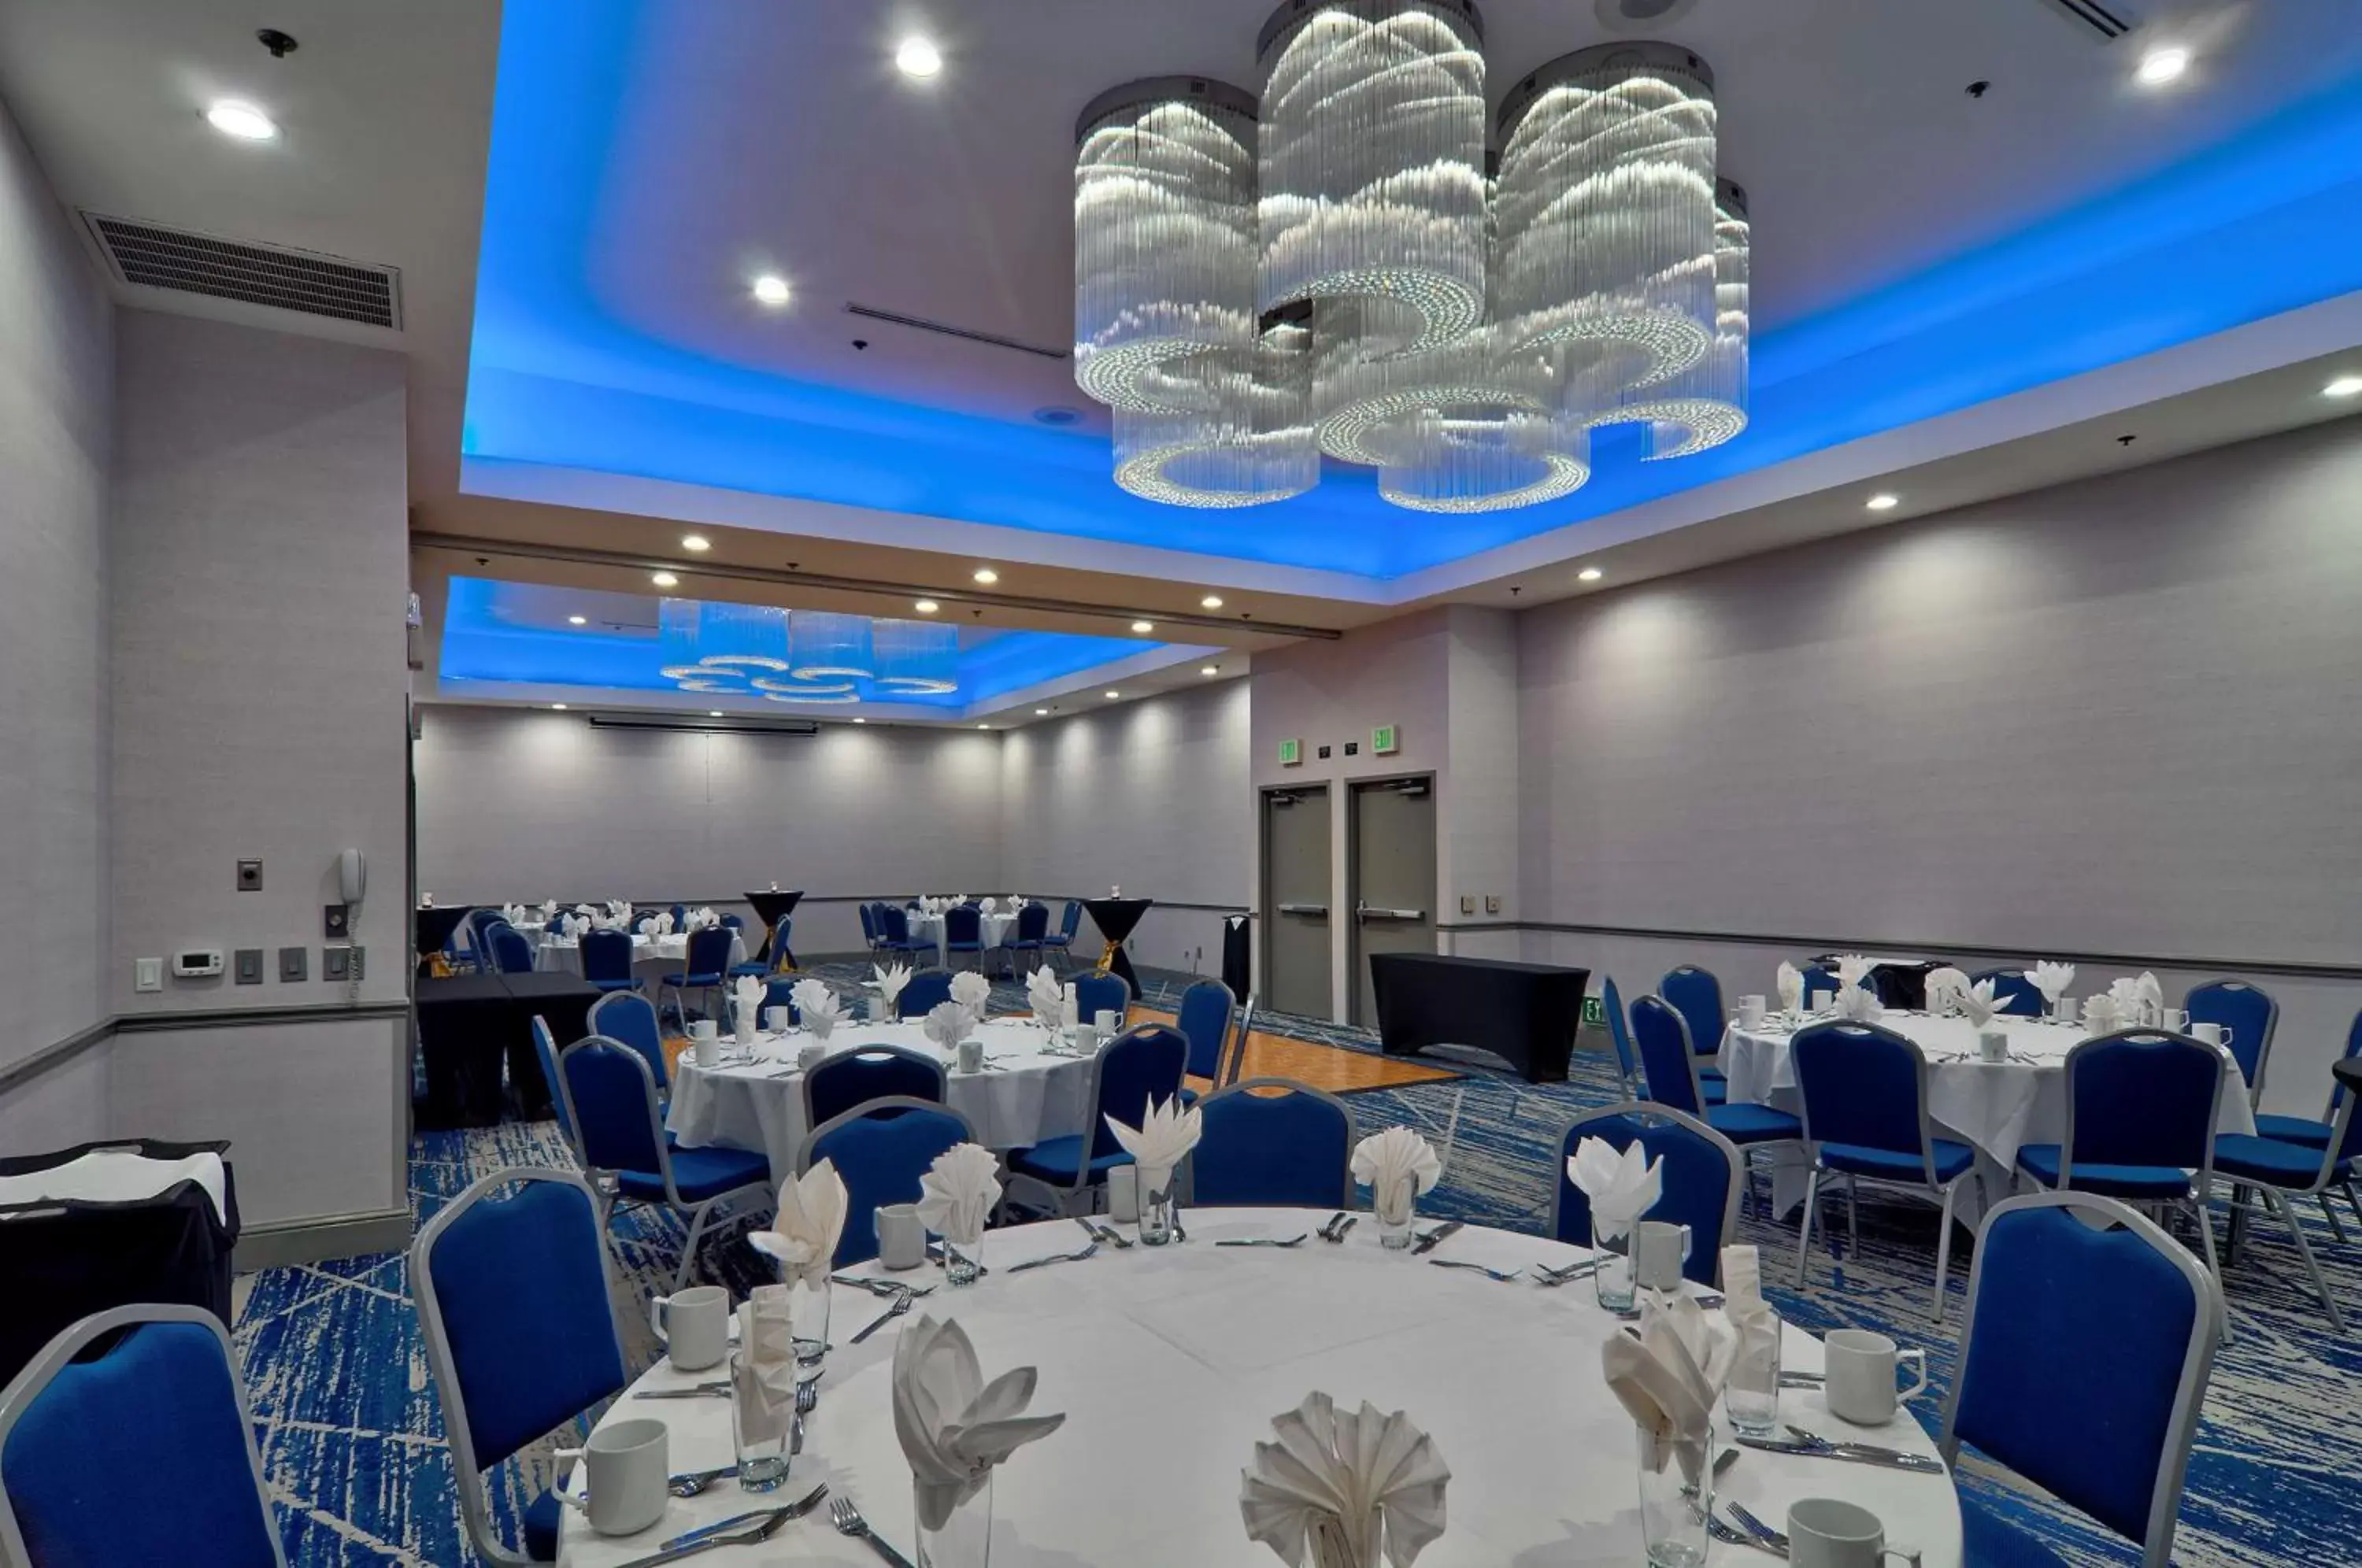 Meeting/conference room, Banquet Facilities in Hilton Garden Inn Livermore